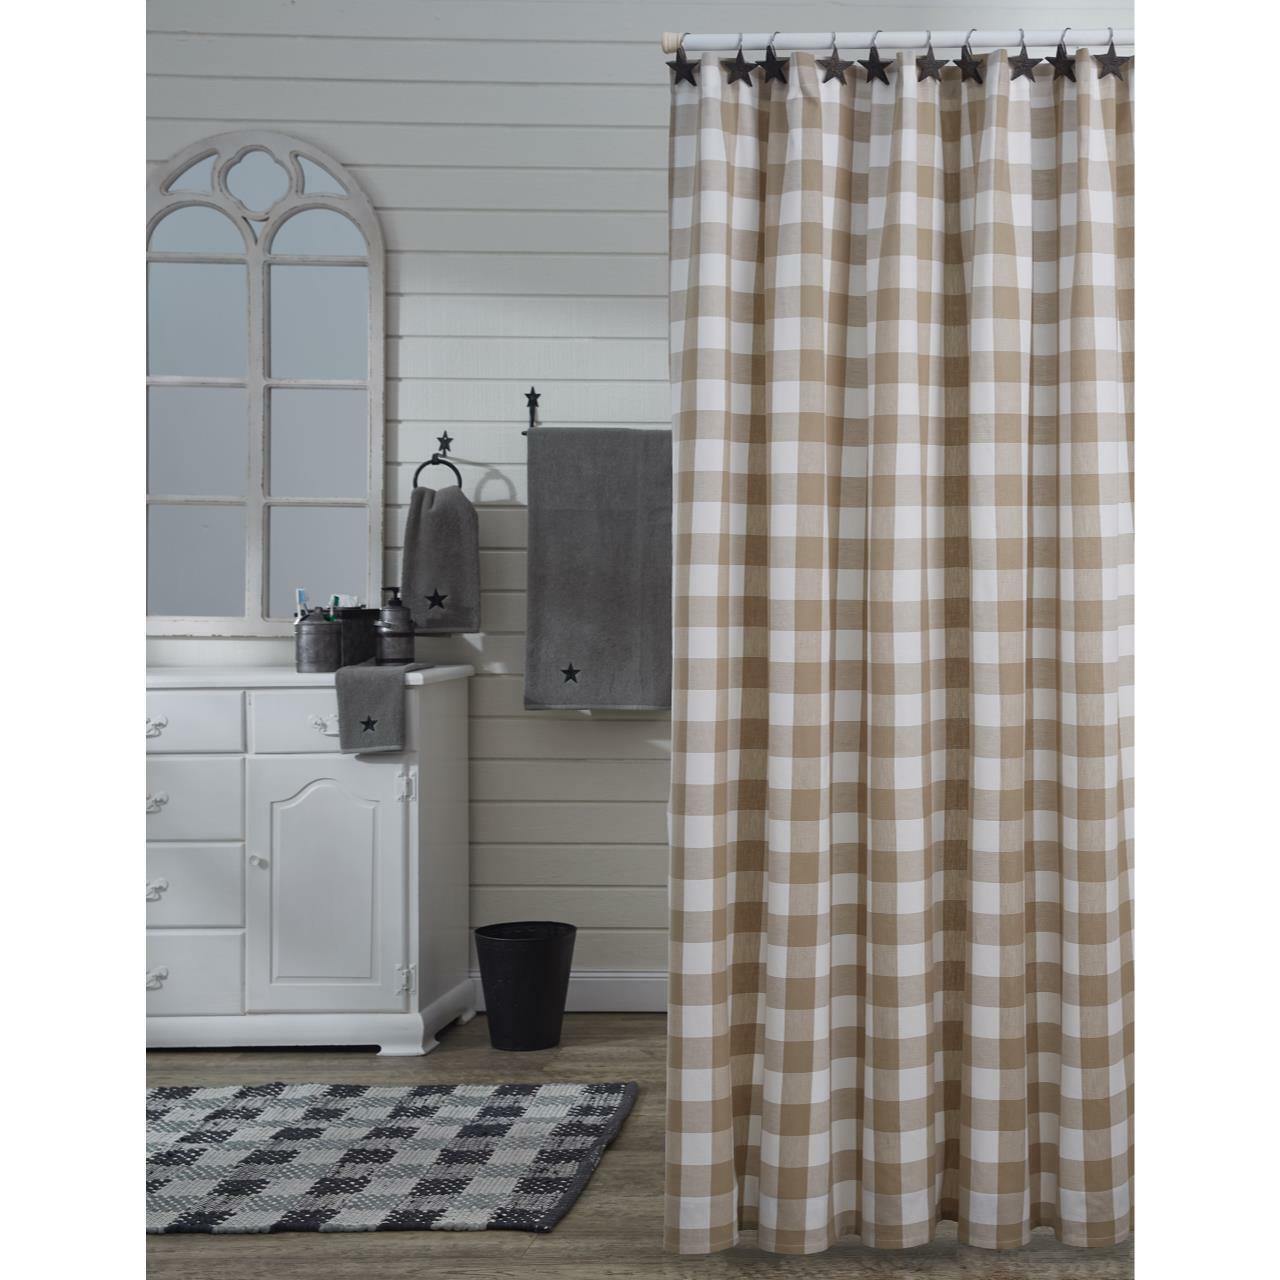 Wicklow Check Natural Shower Curtain - 72" x 72" Park Designs - The Fox Decor